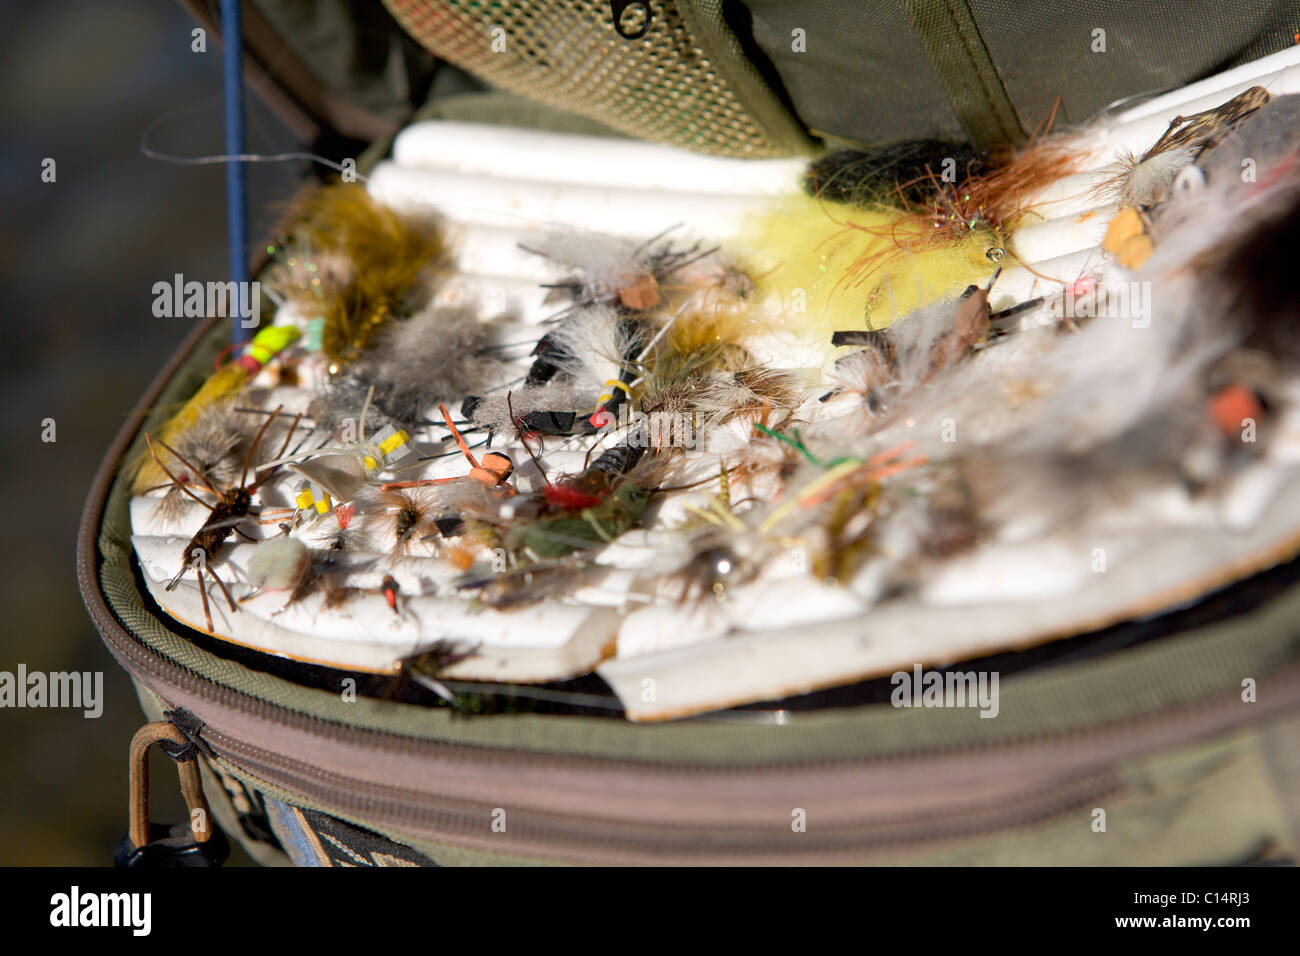 A close-up view of a collection of flies for fishing. Stock Photo